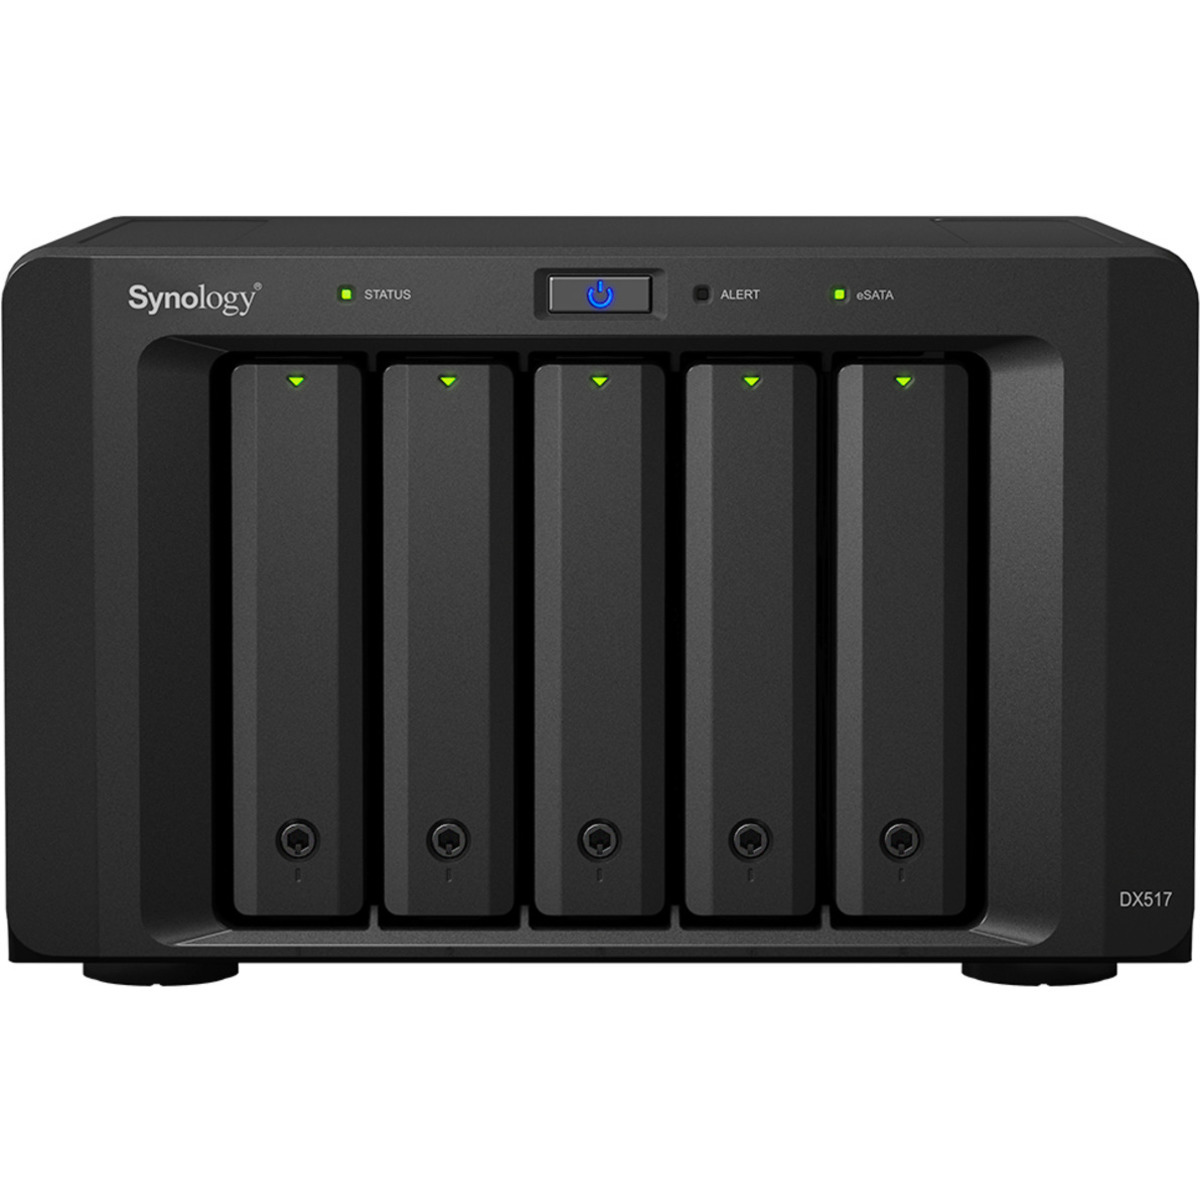 Synology DX517 External Expansion Drive 60tb 5-Bay Desktop Multimedia / Power User / Business Expansion Enclosure 5x12tb Western Digital Ultrastar DC HC520 HUH721212ALE600 3.5 7200rpm SATA 6Gb/s HDD ENTERPRISE Class Drives Installed - Burn-In Tested DX517 External Expansion Drive